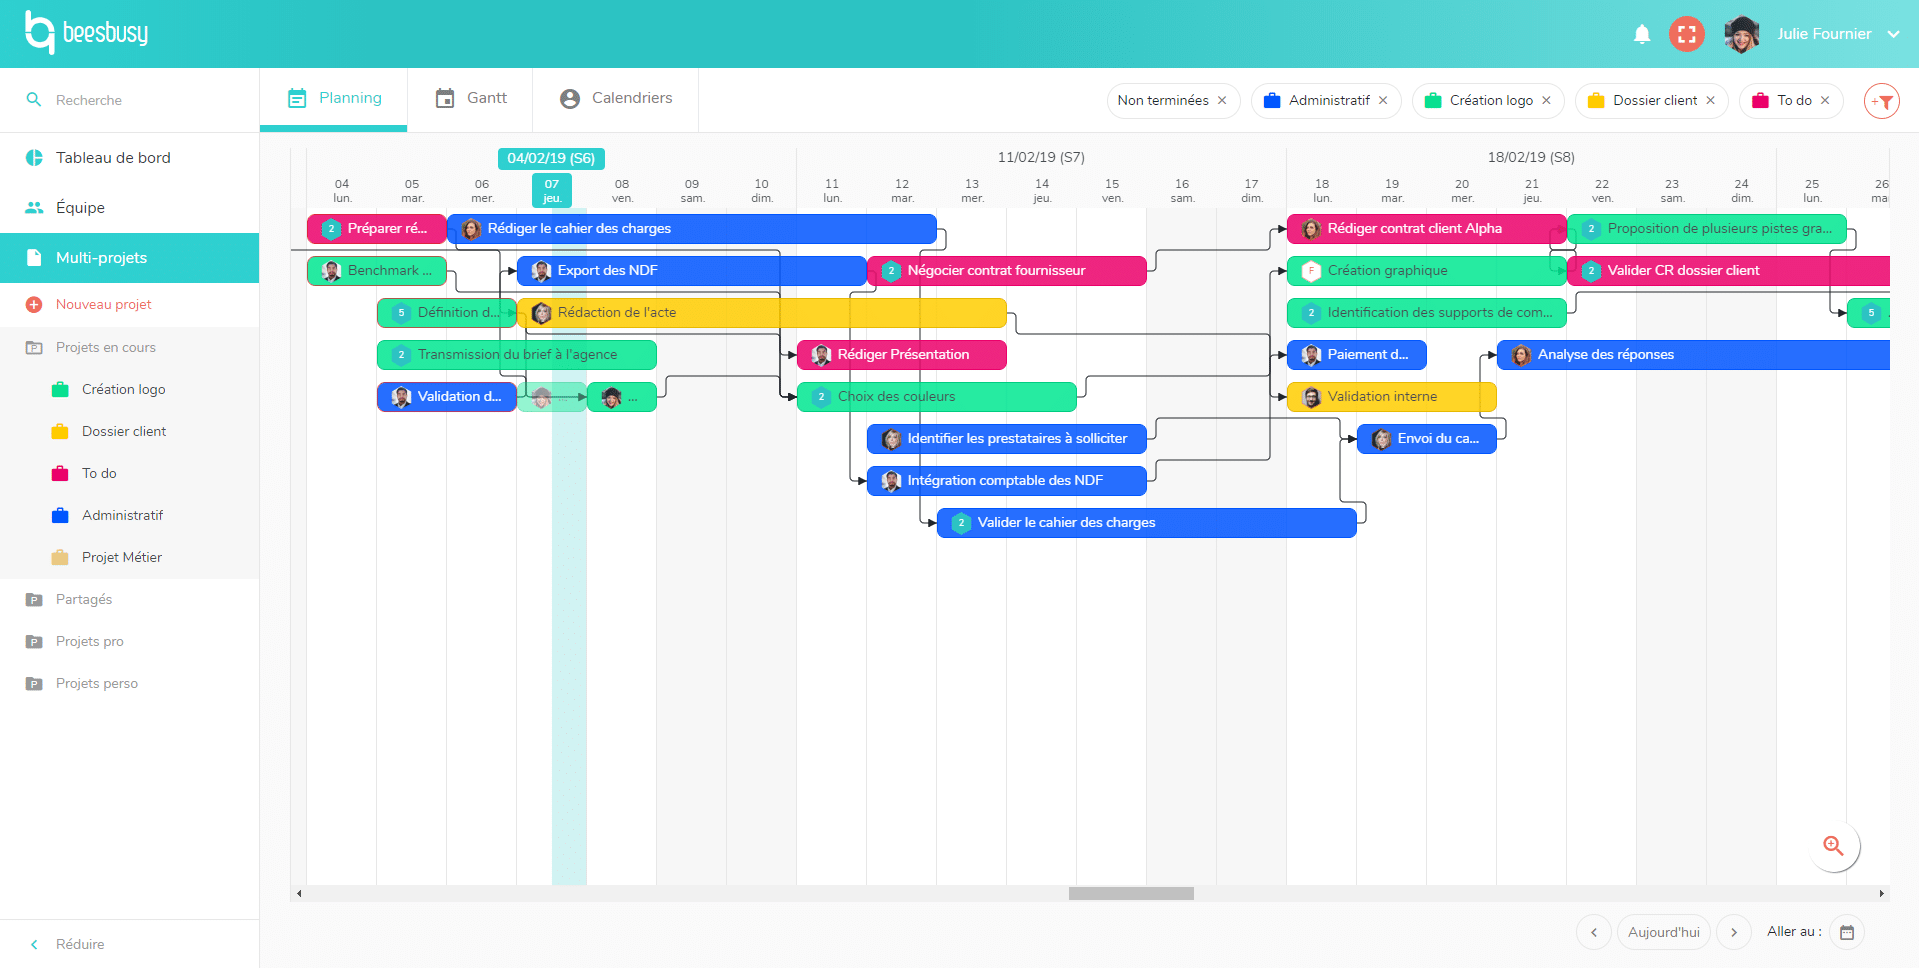 This view displays the schedules of selected projects.